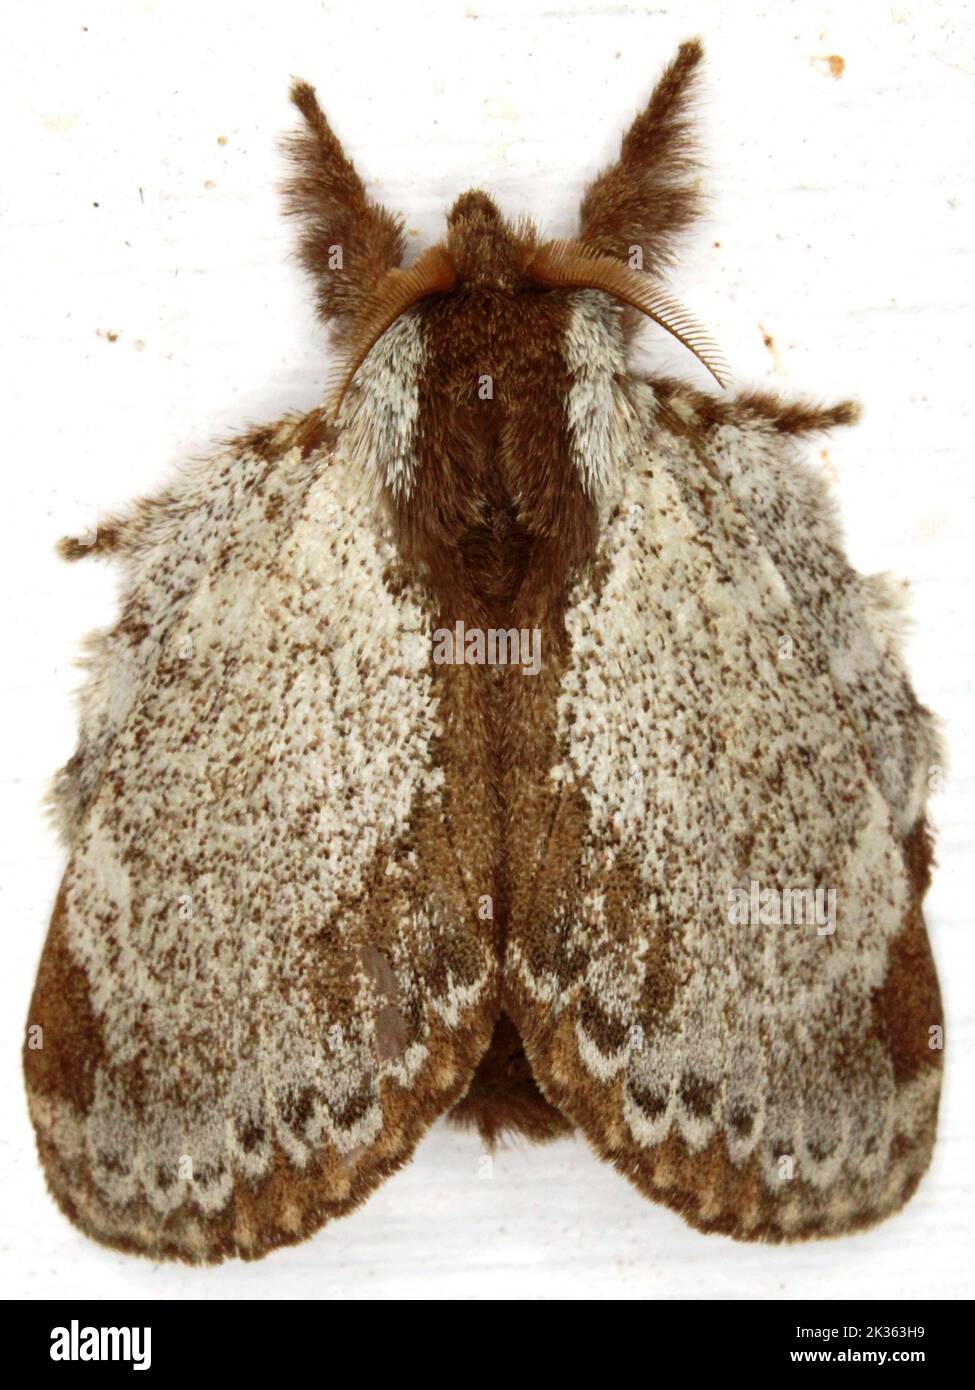 Lappet moth (family Lasiocampidae) indeterminate species isolated on a white background Stock Photo